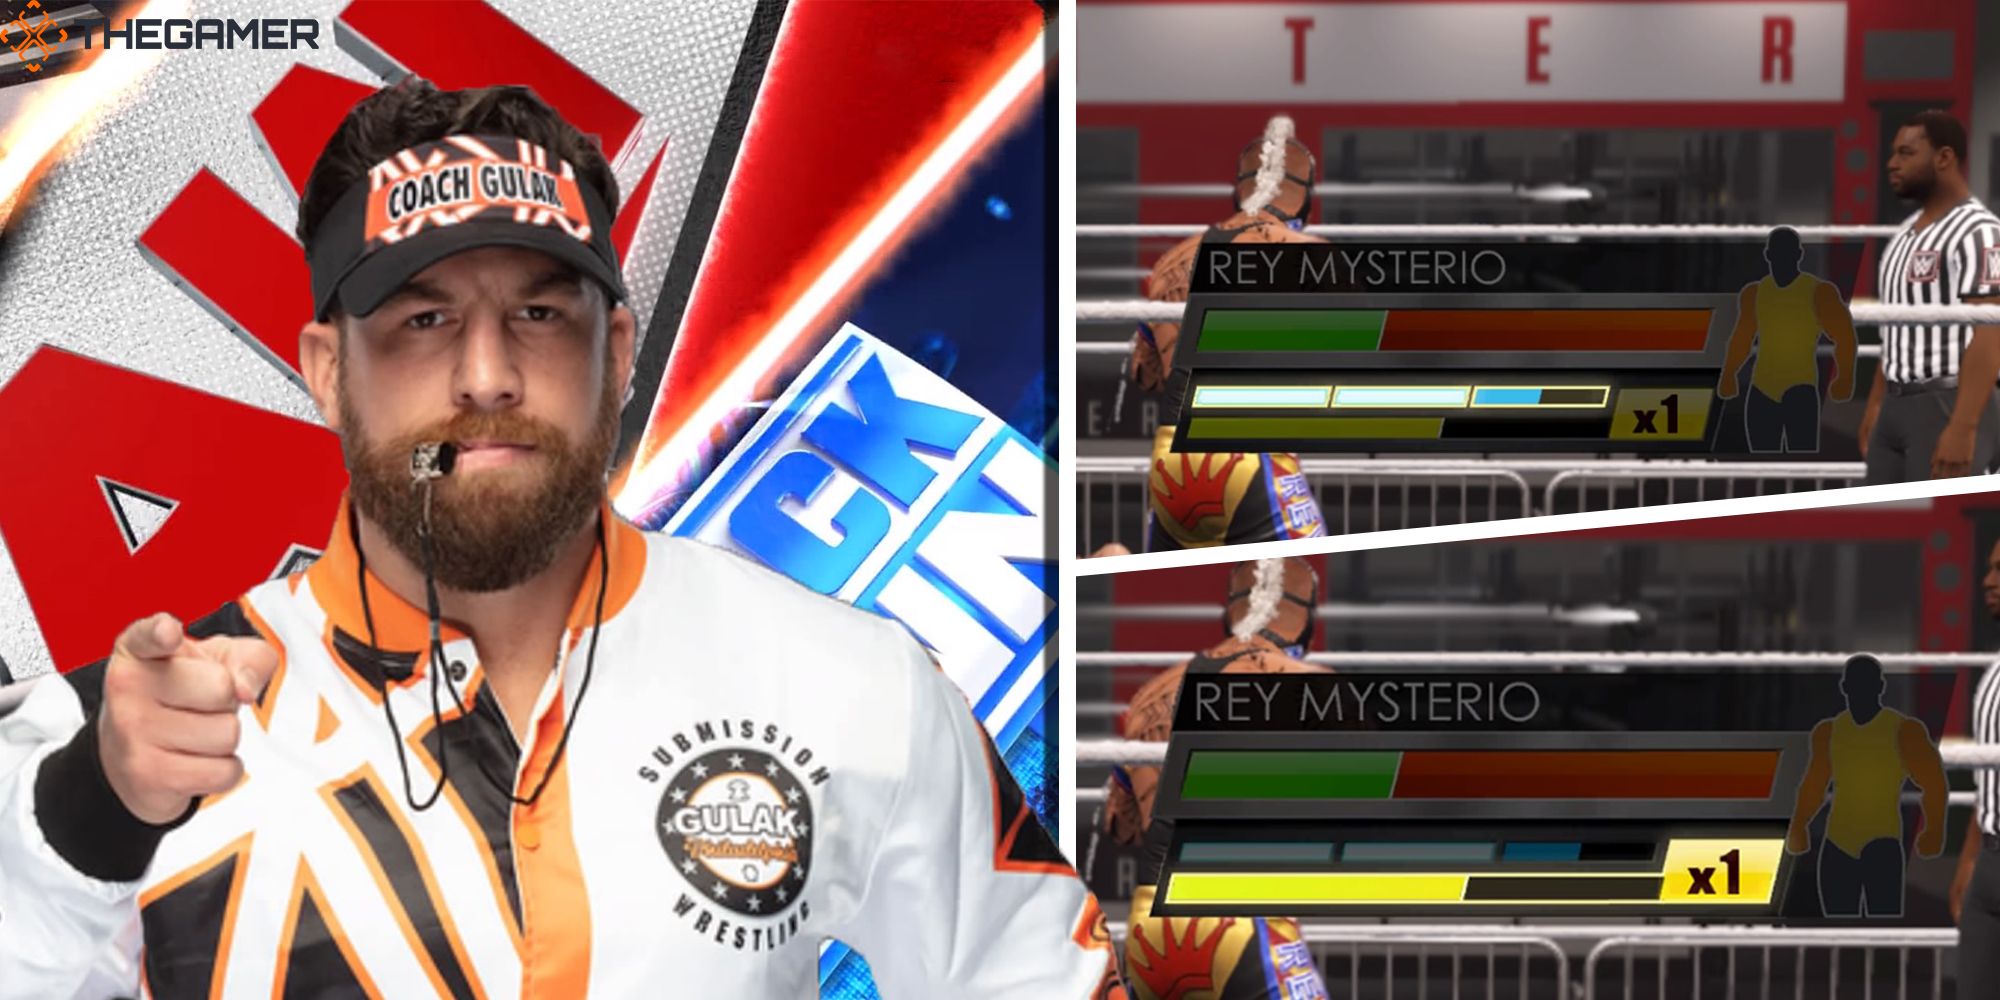 [Left Panel] Drew Gulak points towards the player against a background featuring the RAW and SMACKDOWN logos. [Right Panel] Split image: Rey Mysterio's special meter and finisher meter. WWE 2K22.